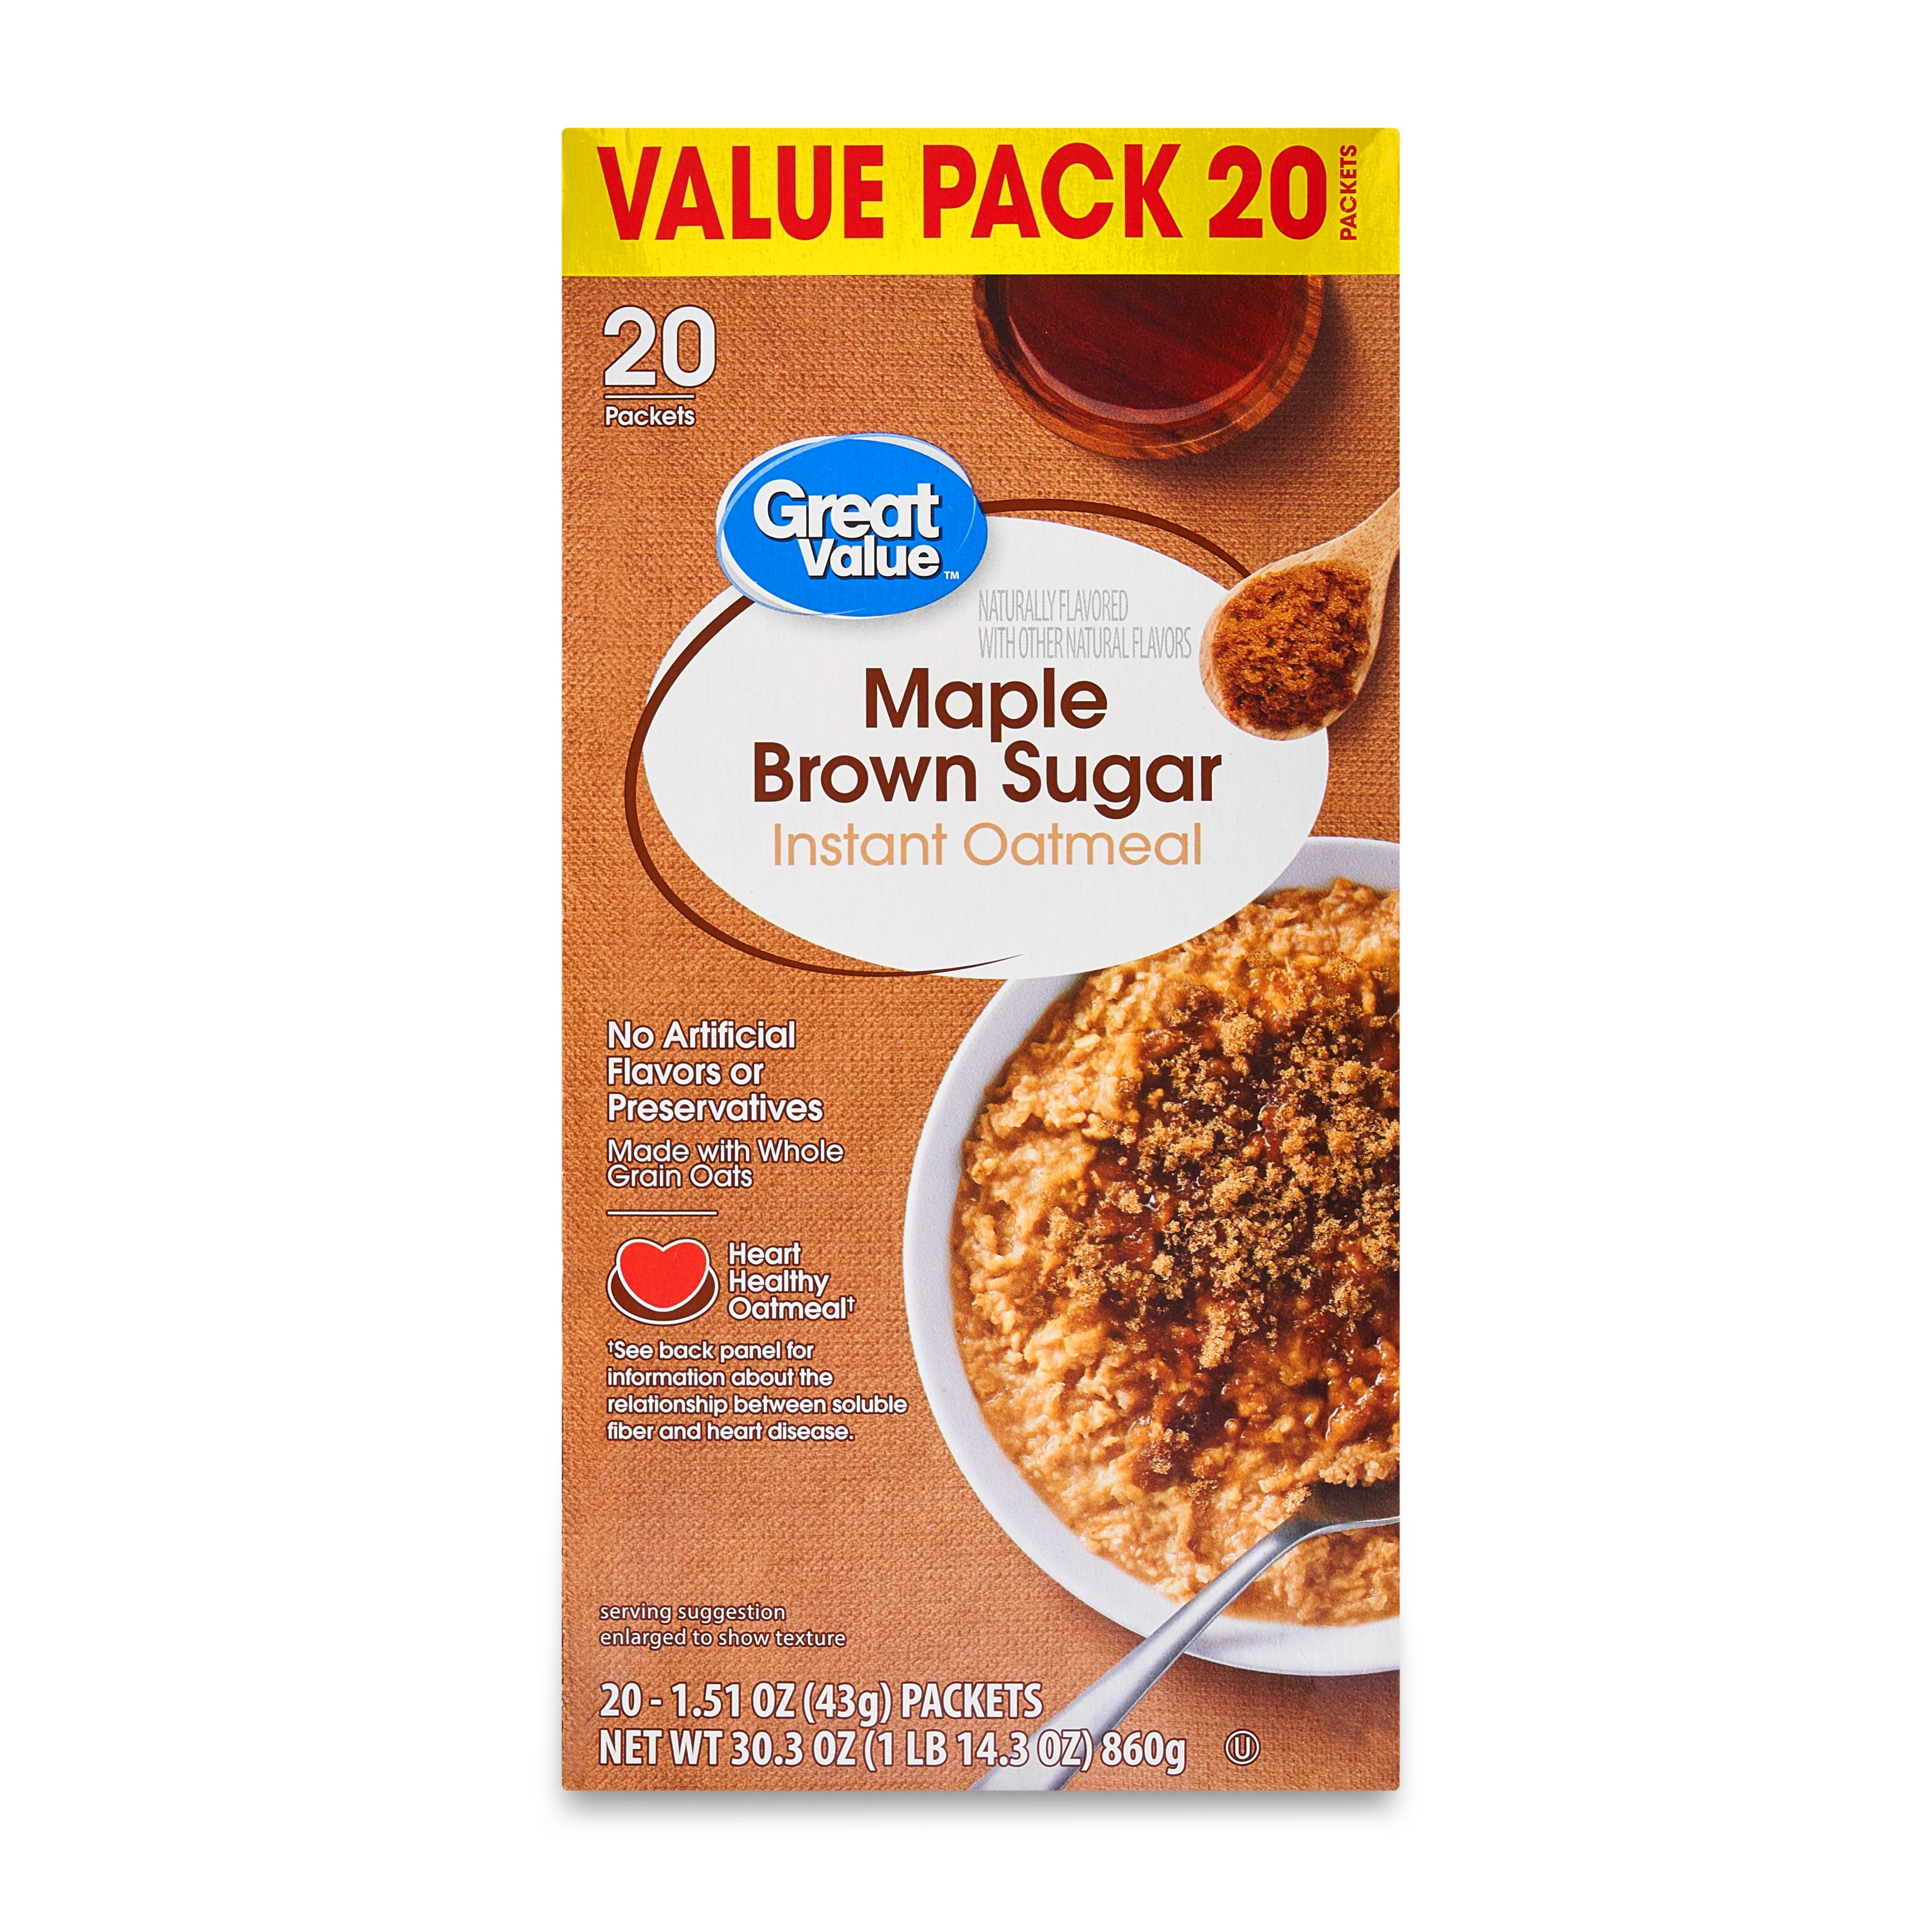 Great Value Maple & Brown Sugar Instant Oatmeal, 1.51 oz, 20 Packets